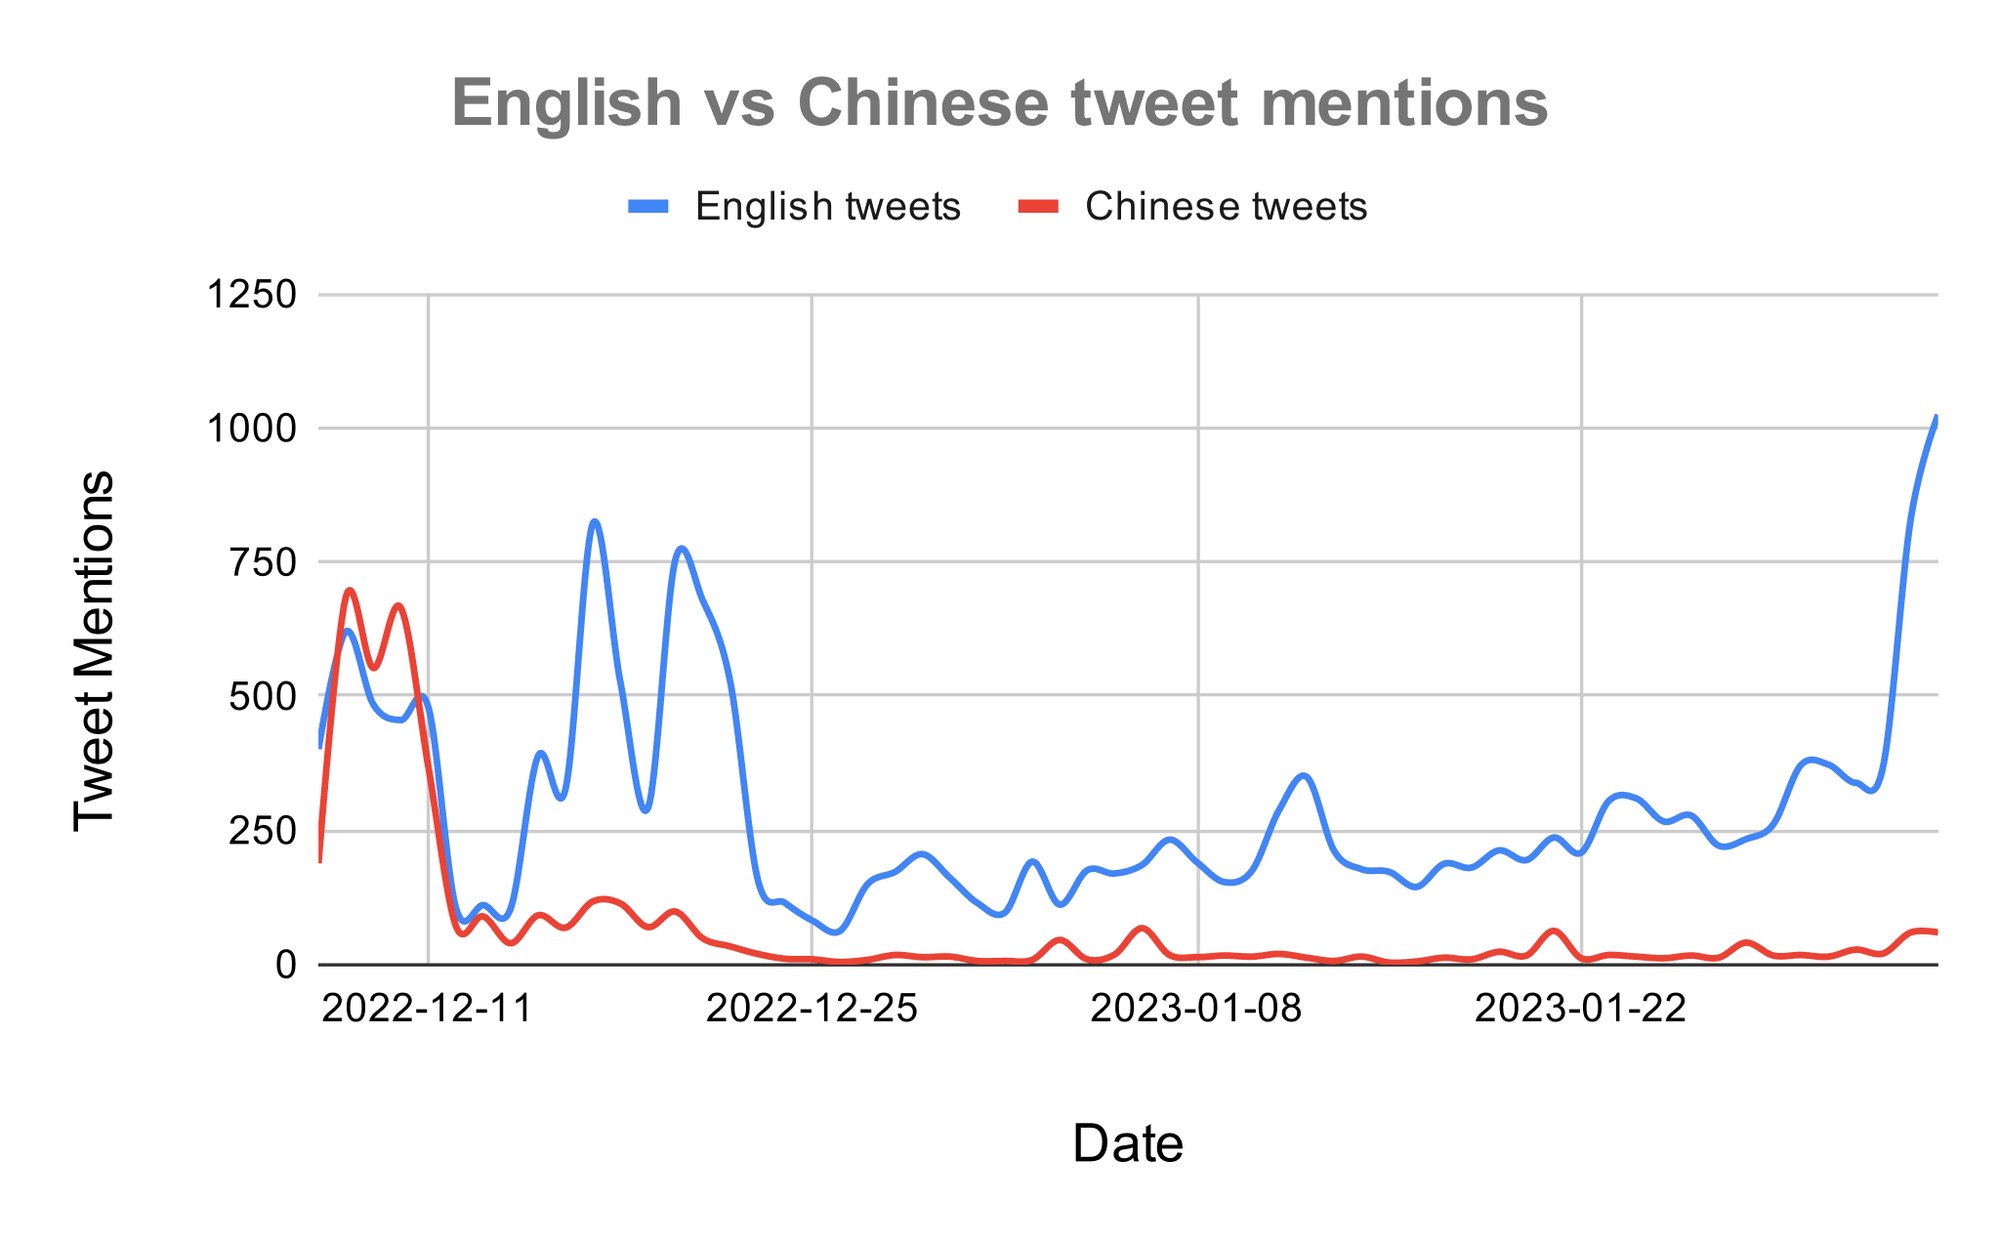 Something weird appears to have happened with the Chinese community not rebounding after OpenAI added the Cloudflare protections. Twitter is blocked in China, but many Chinese users still use VPNs to access it. Several high profile Chinese users deleted their tweets mentioning @ChatGPTBot around this time.